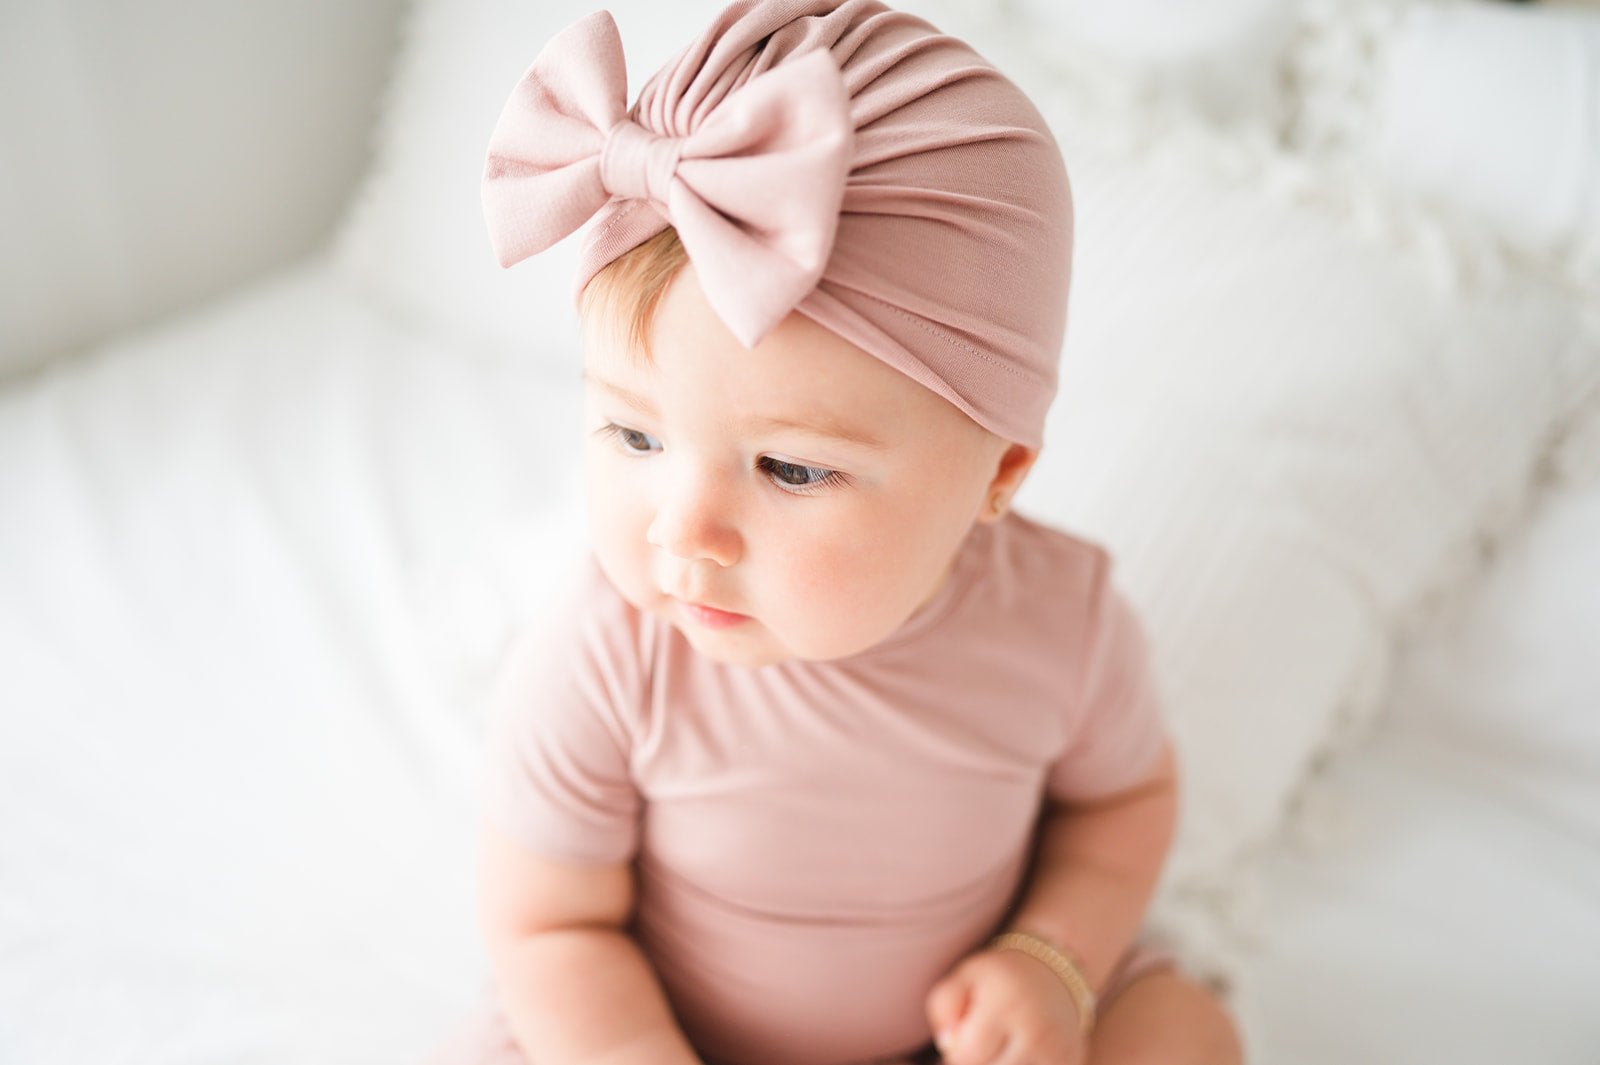 Bow Turban Hat - Dusty Pink - Harp Angel Boutique